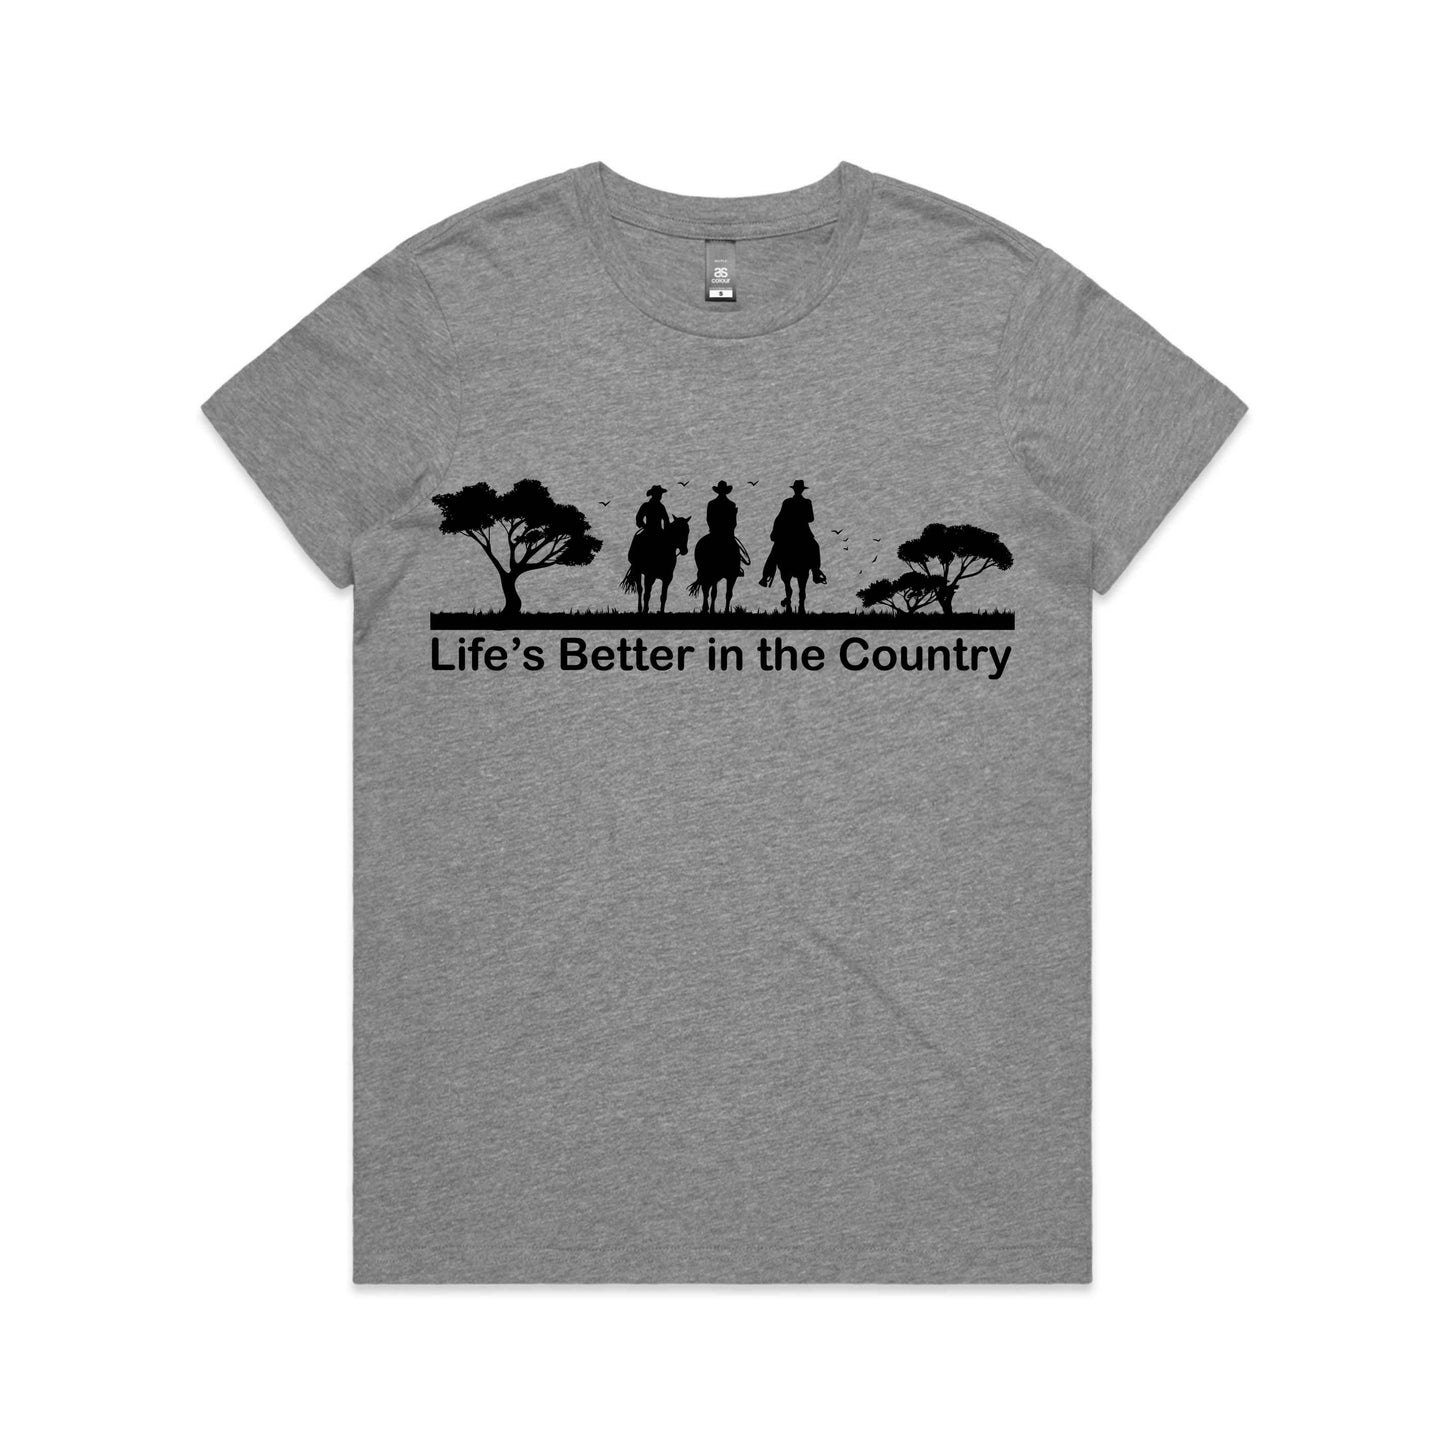 Hayco Women's Life's Better in the Country